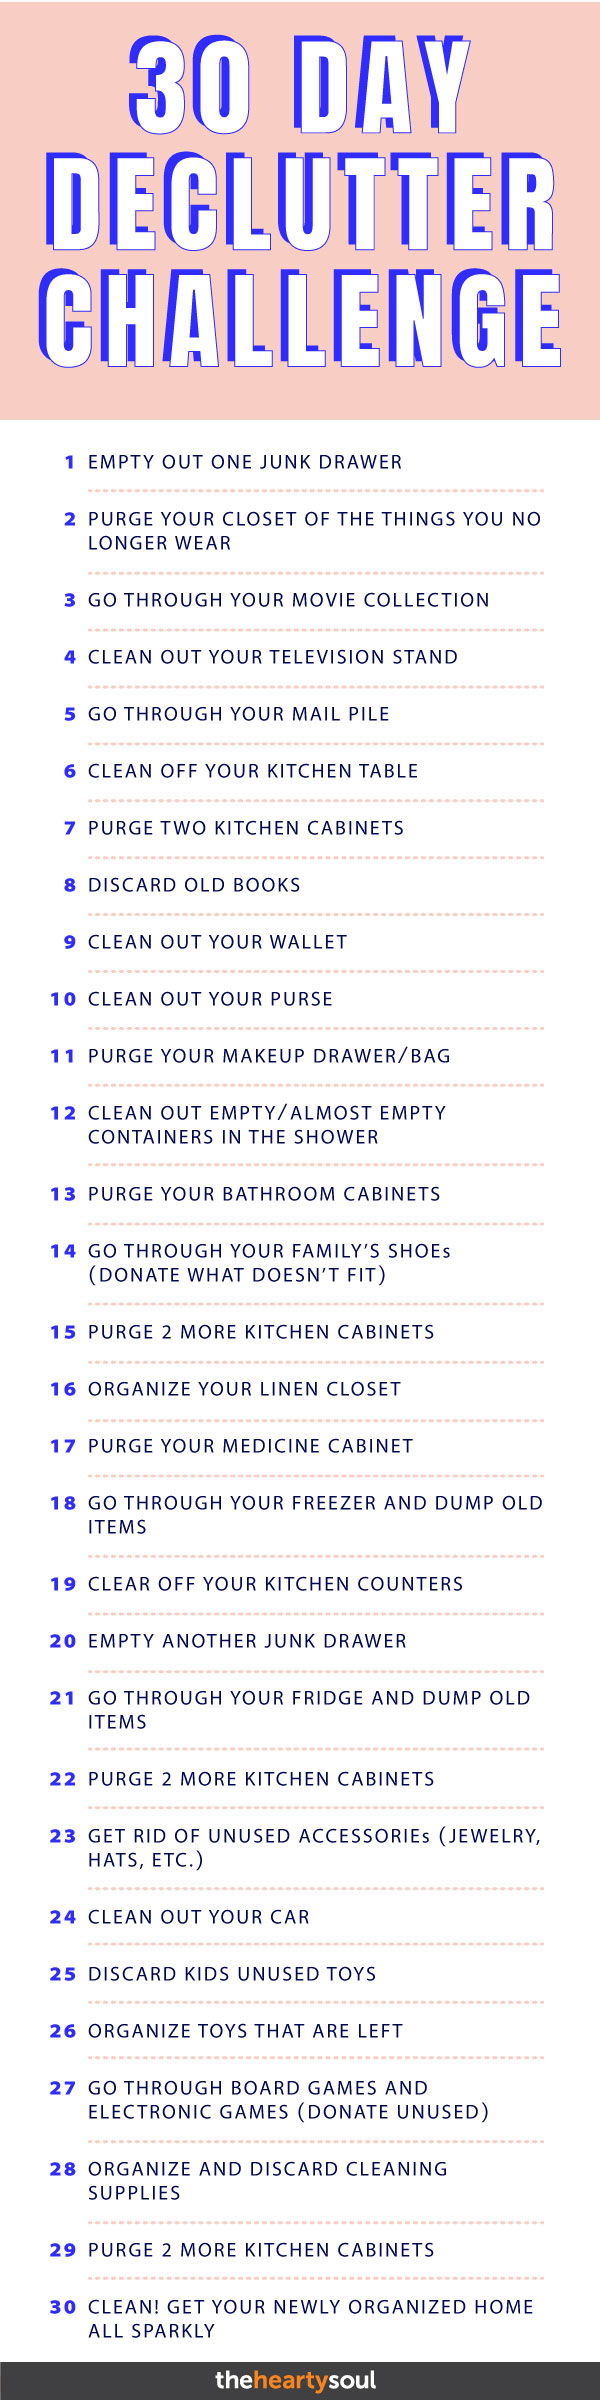 30 Day Declutter Challenge - Infographic